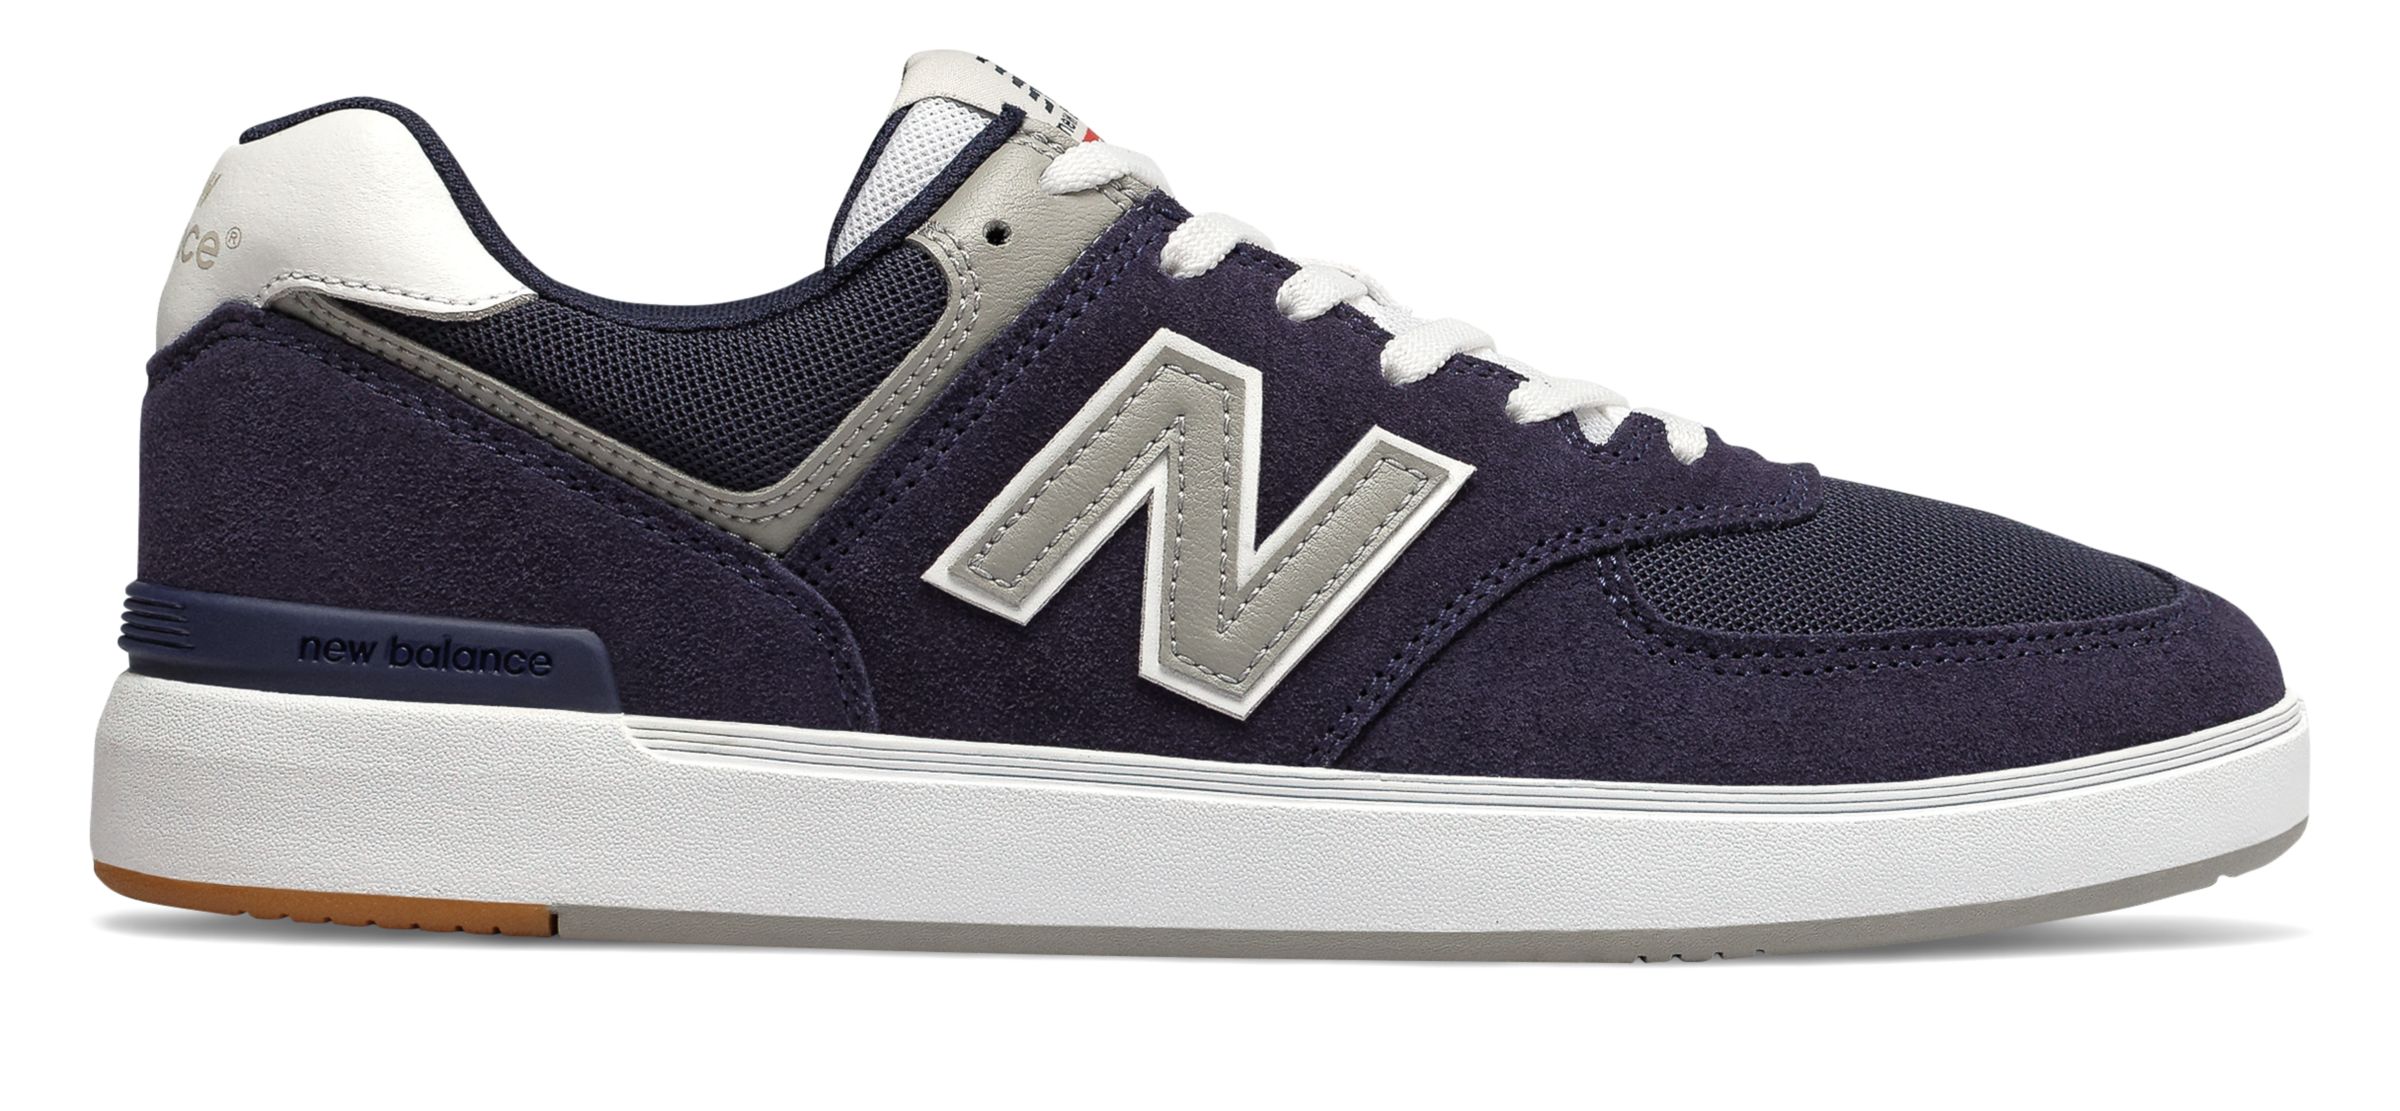 Men's Shoes on Clearance | New Balance